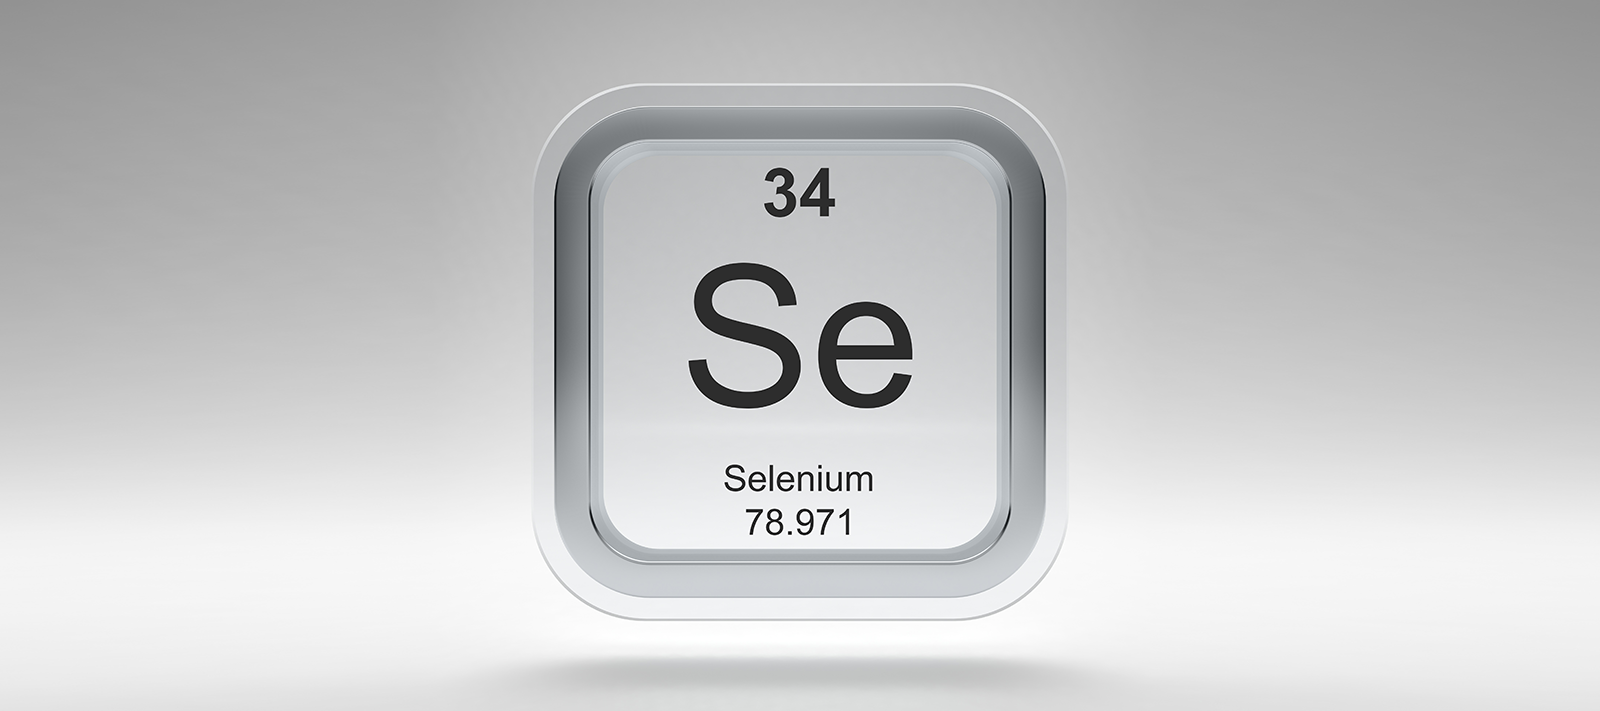 Is Selenium easy to learn?